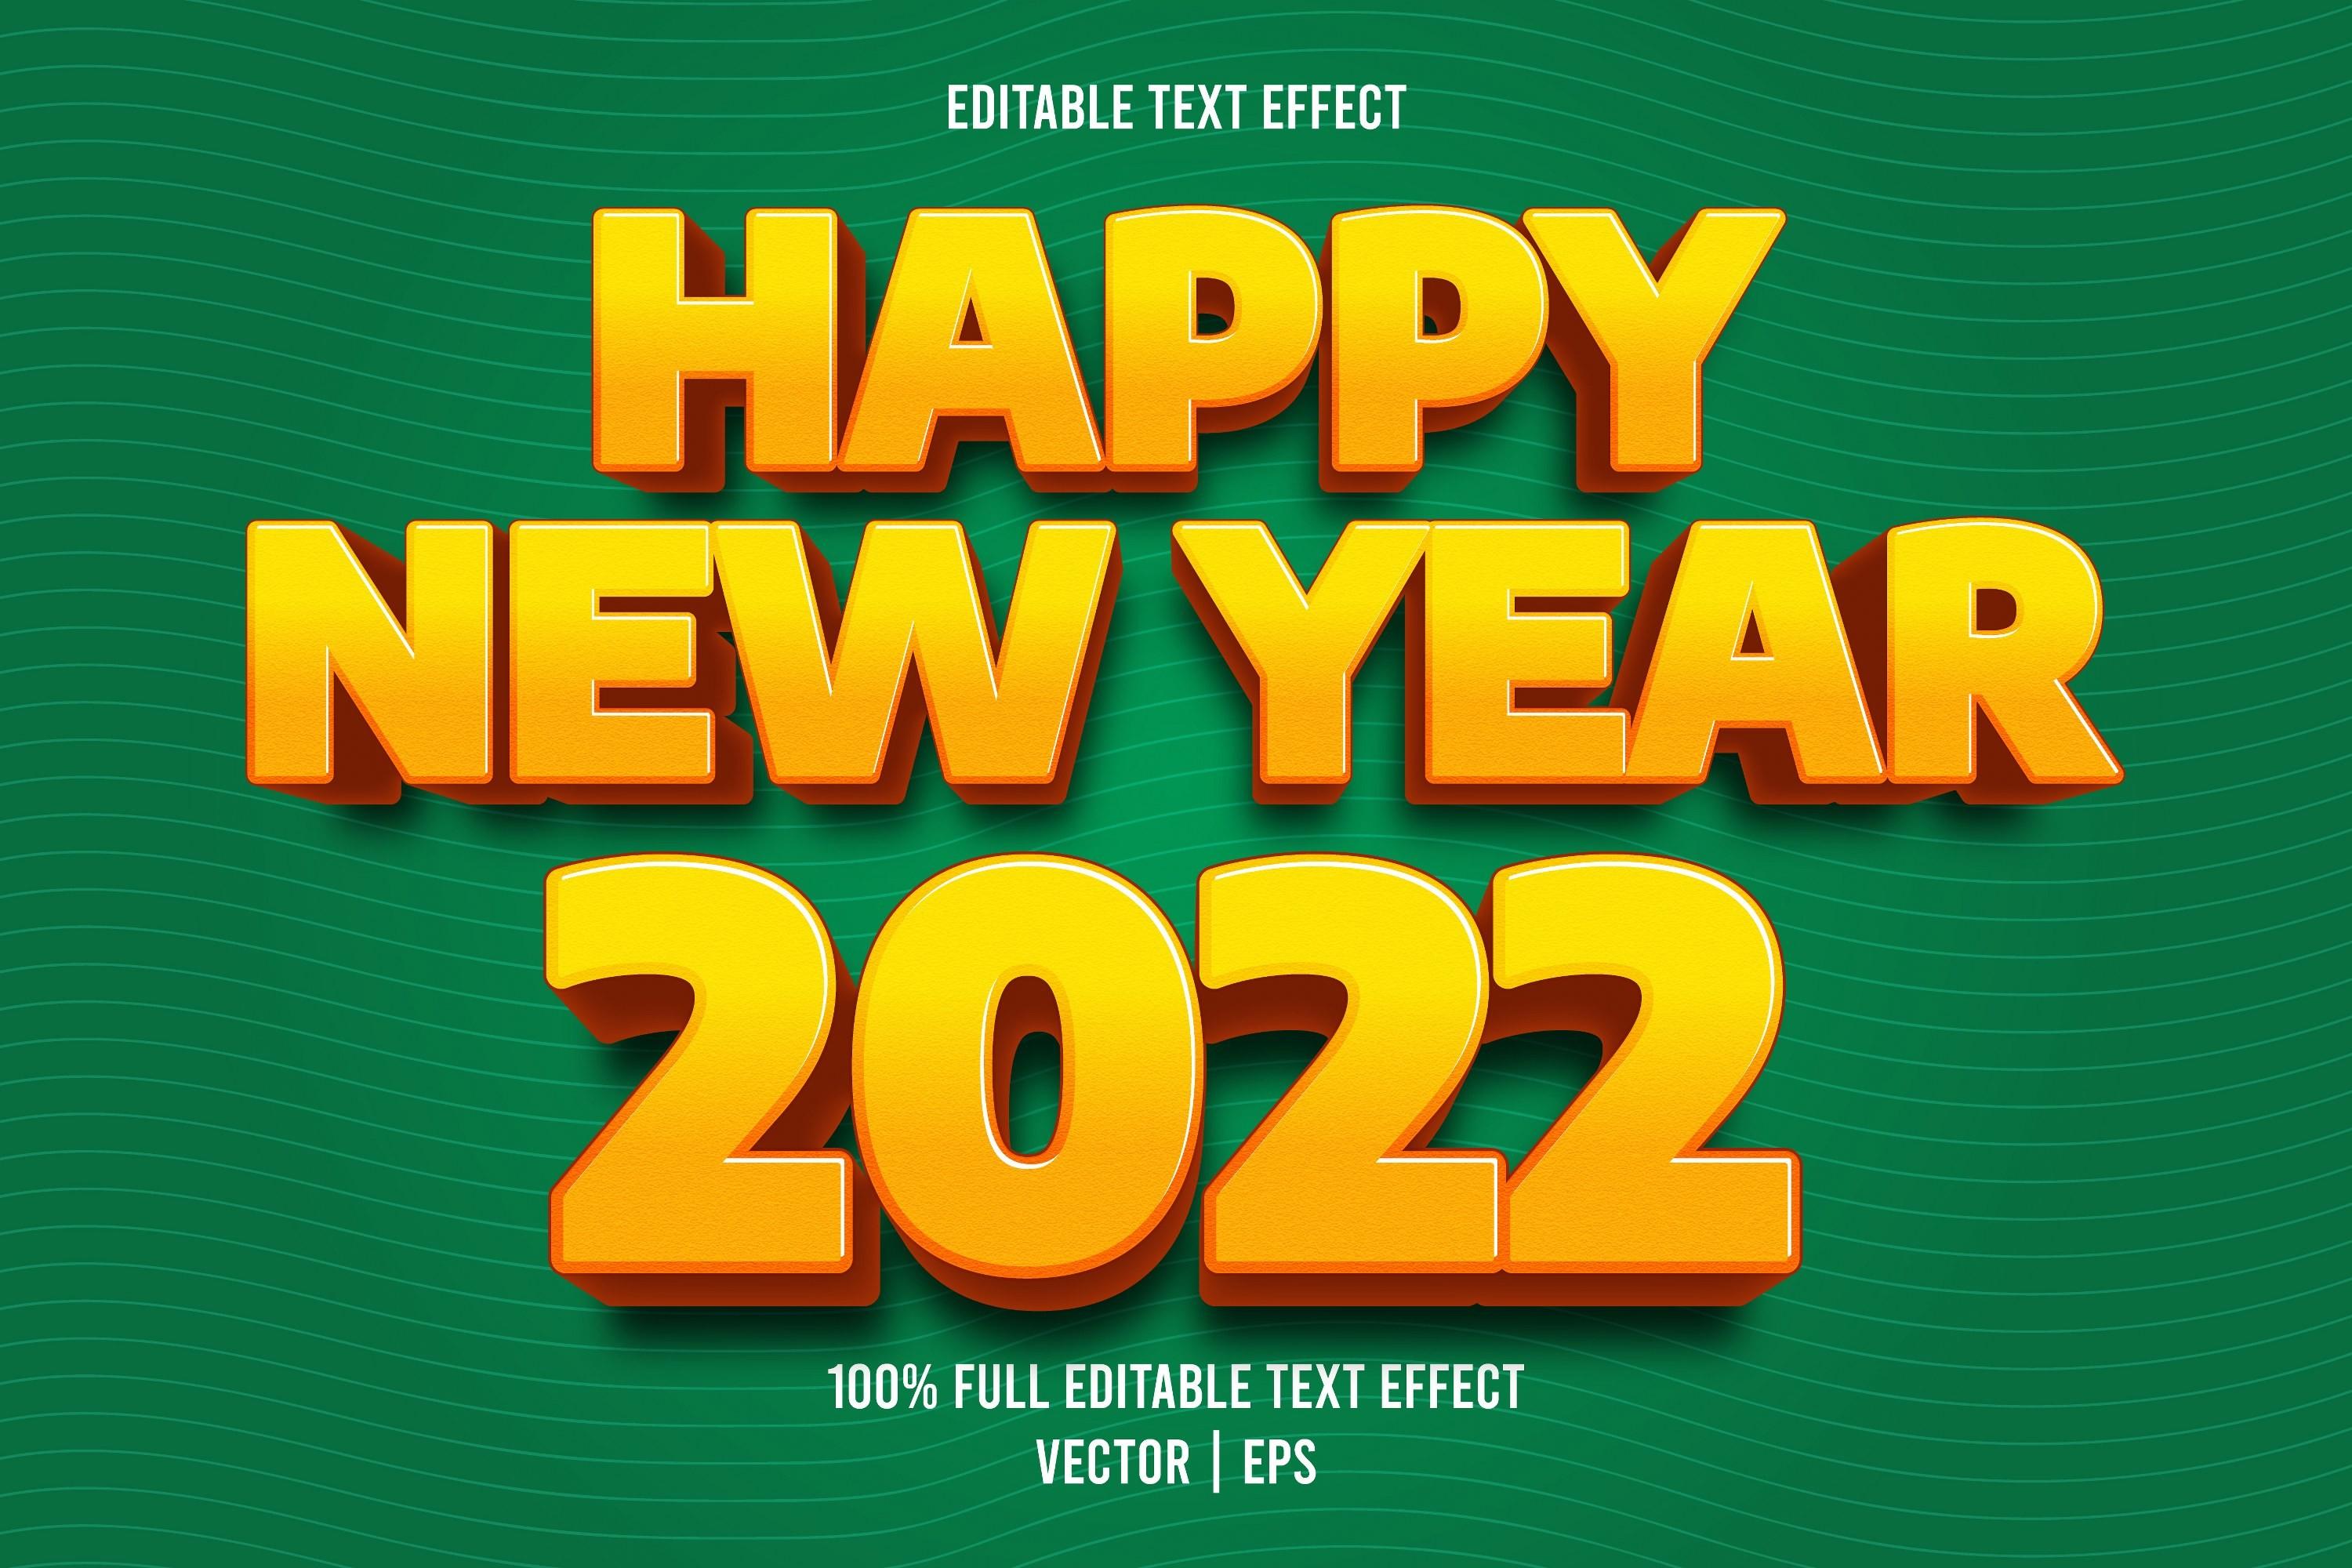 Happy New Year 2022 Editable Text Effect